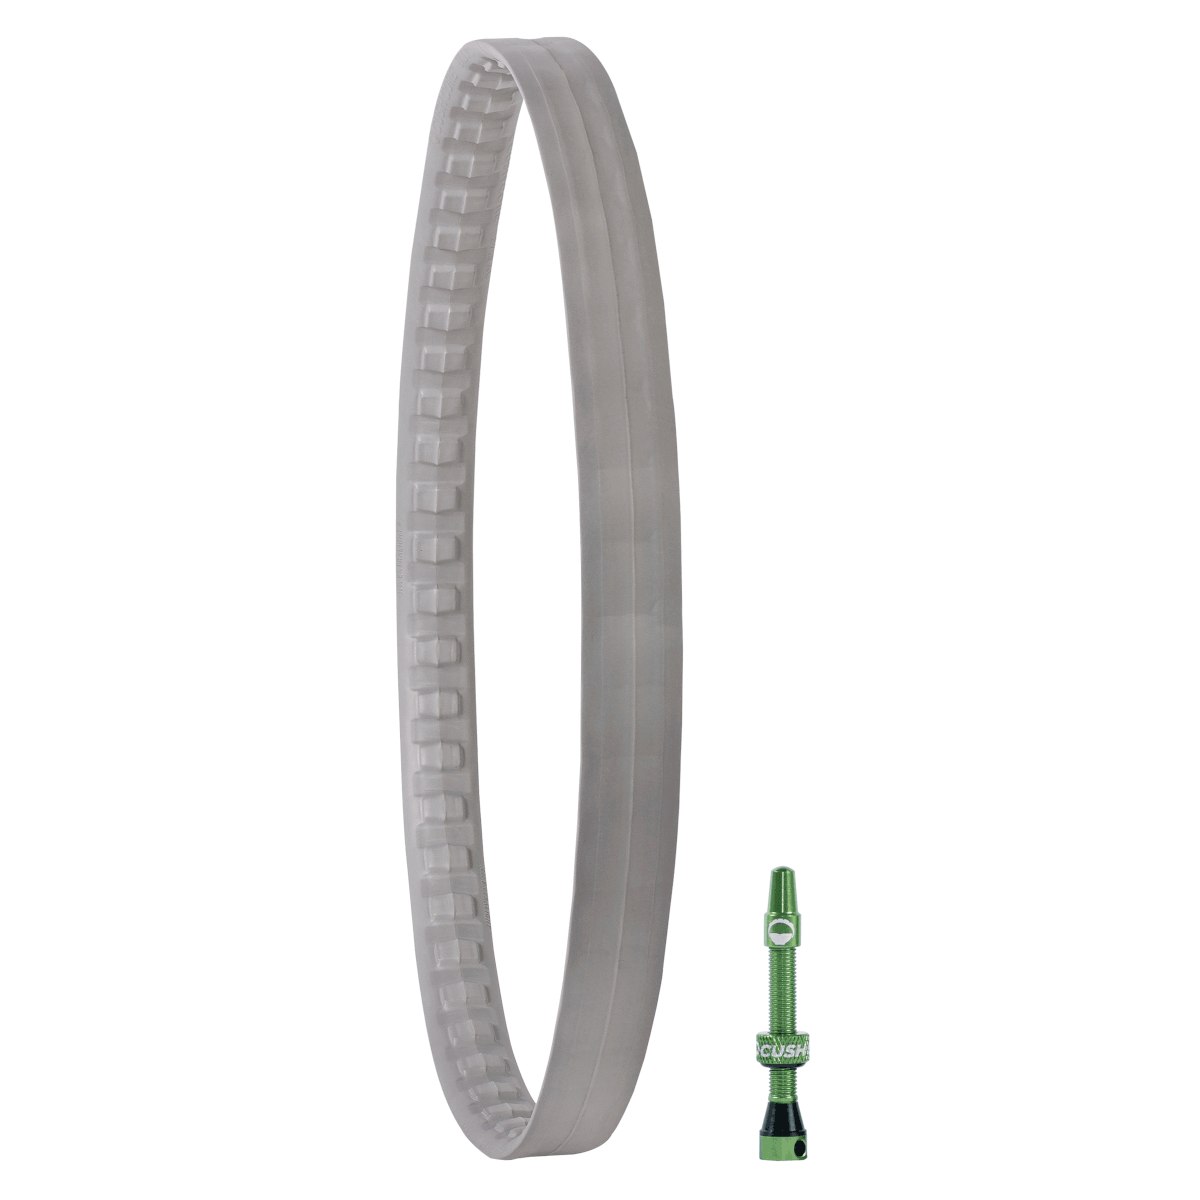 Picture of CushCore XC Suspension System Tire Insert - incl. Valve - Single (1 Piece)